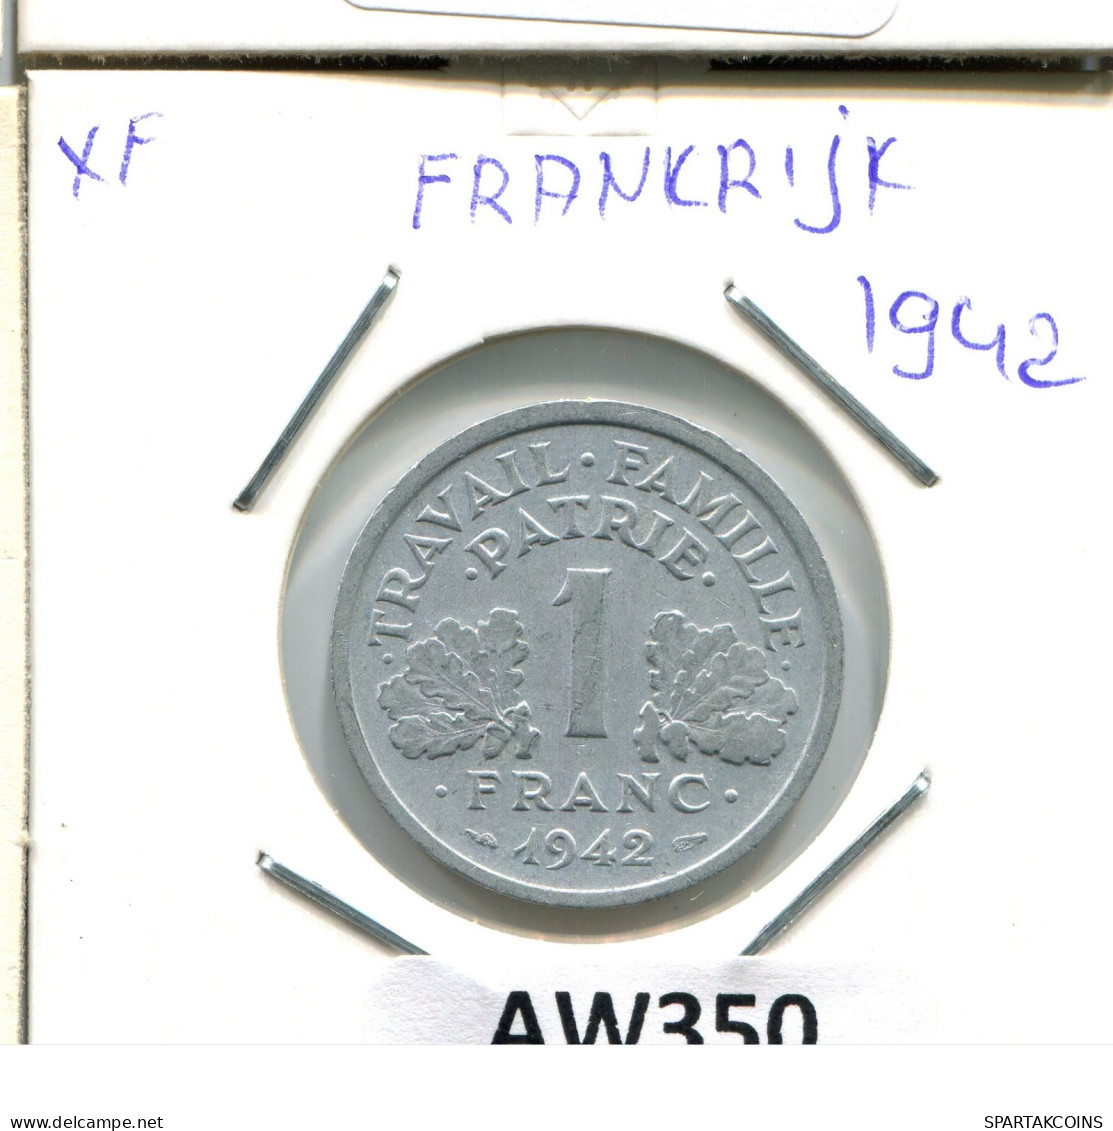 1 FRANC 1942 (Heavy Type) FRANCE Coin French Coin #AW350.U.A - 1 Franc